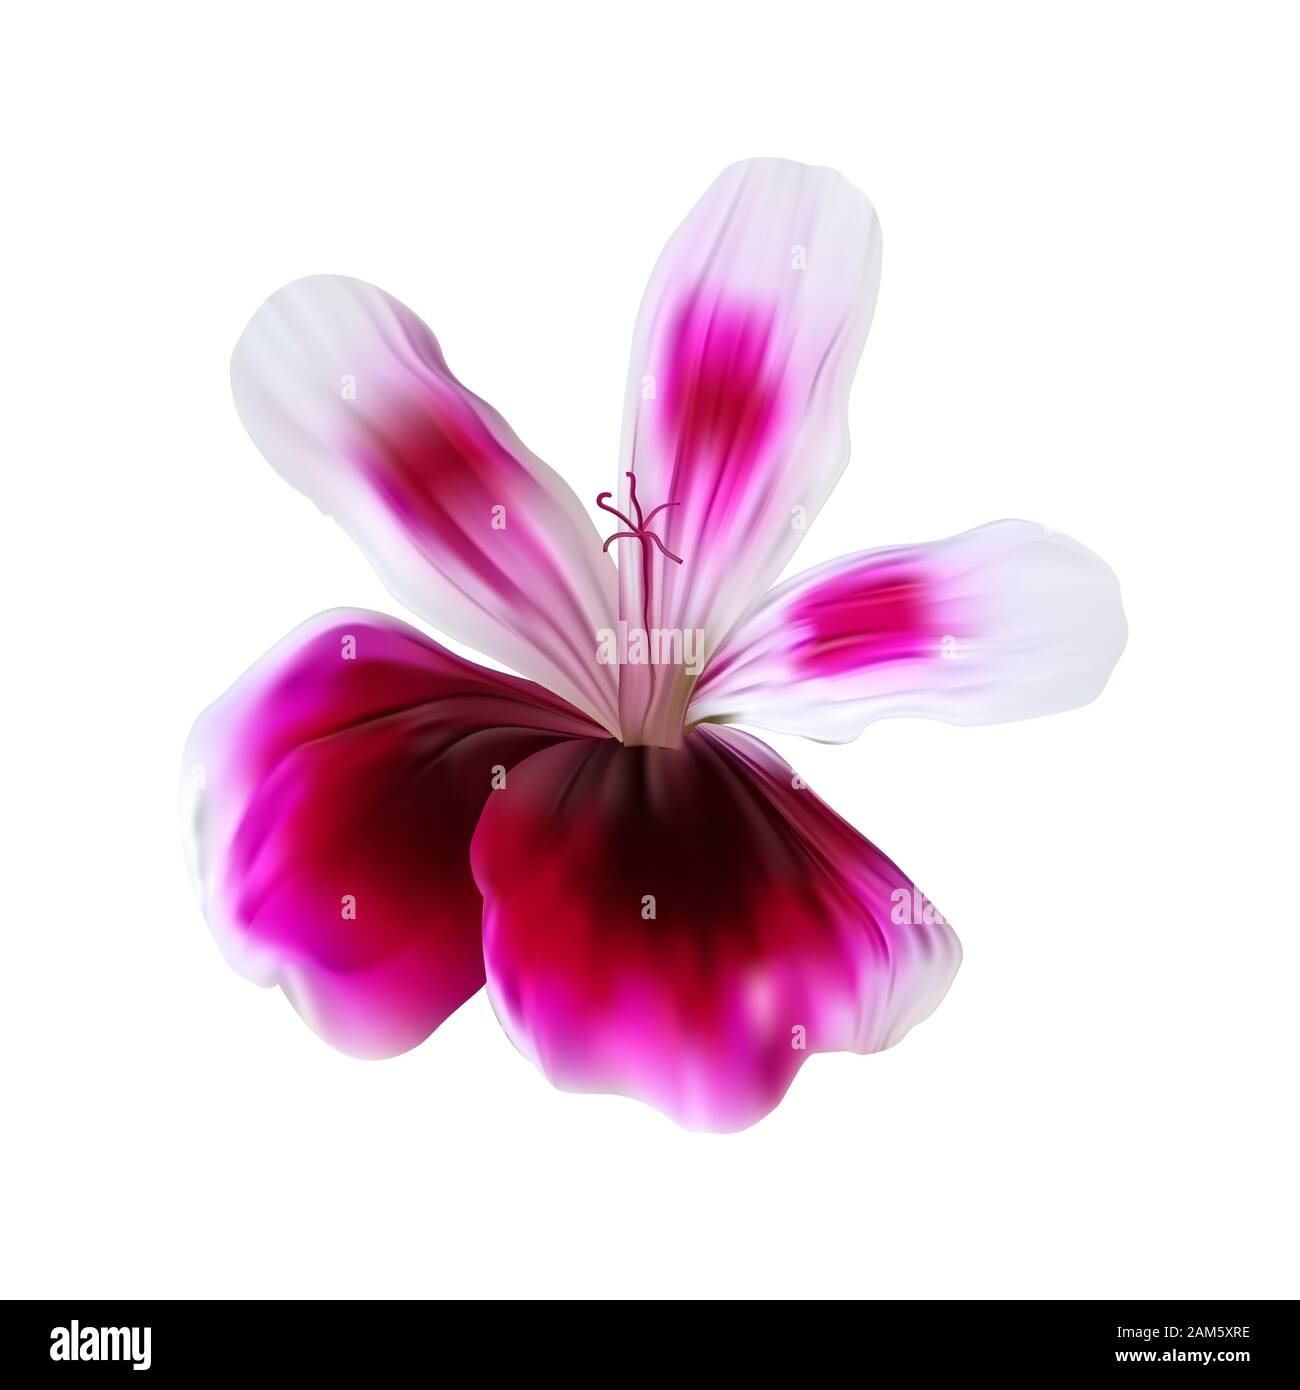 Small-leaved pink pelargonium vector close-up. Purple pink geranium flowers against mosquitoes and for aromatic oils. Stock Vector